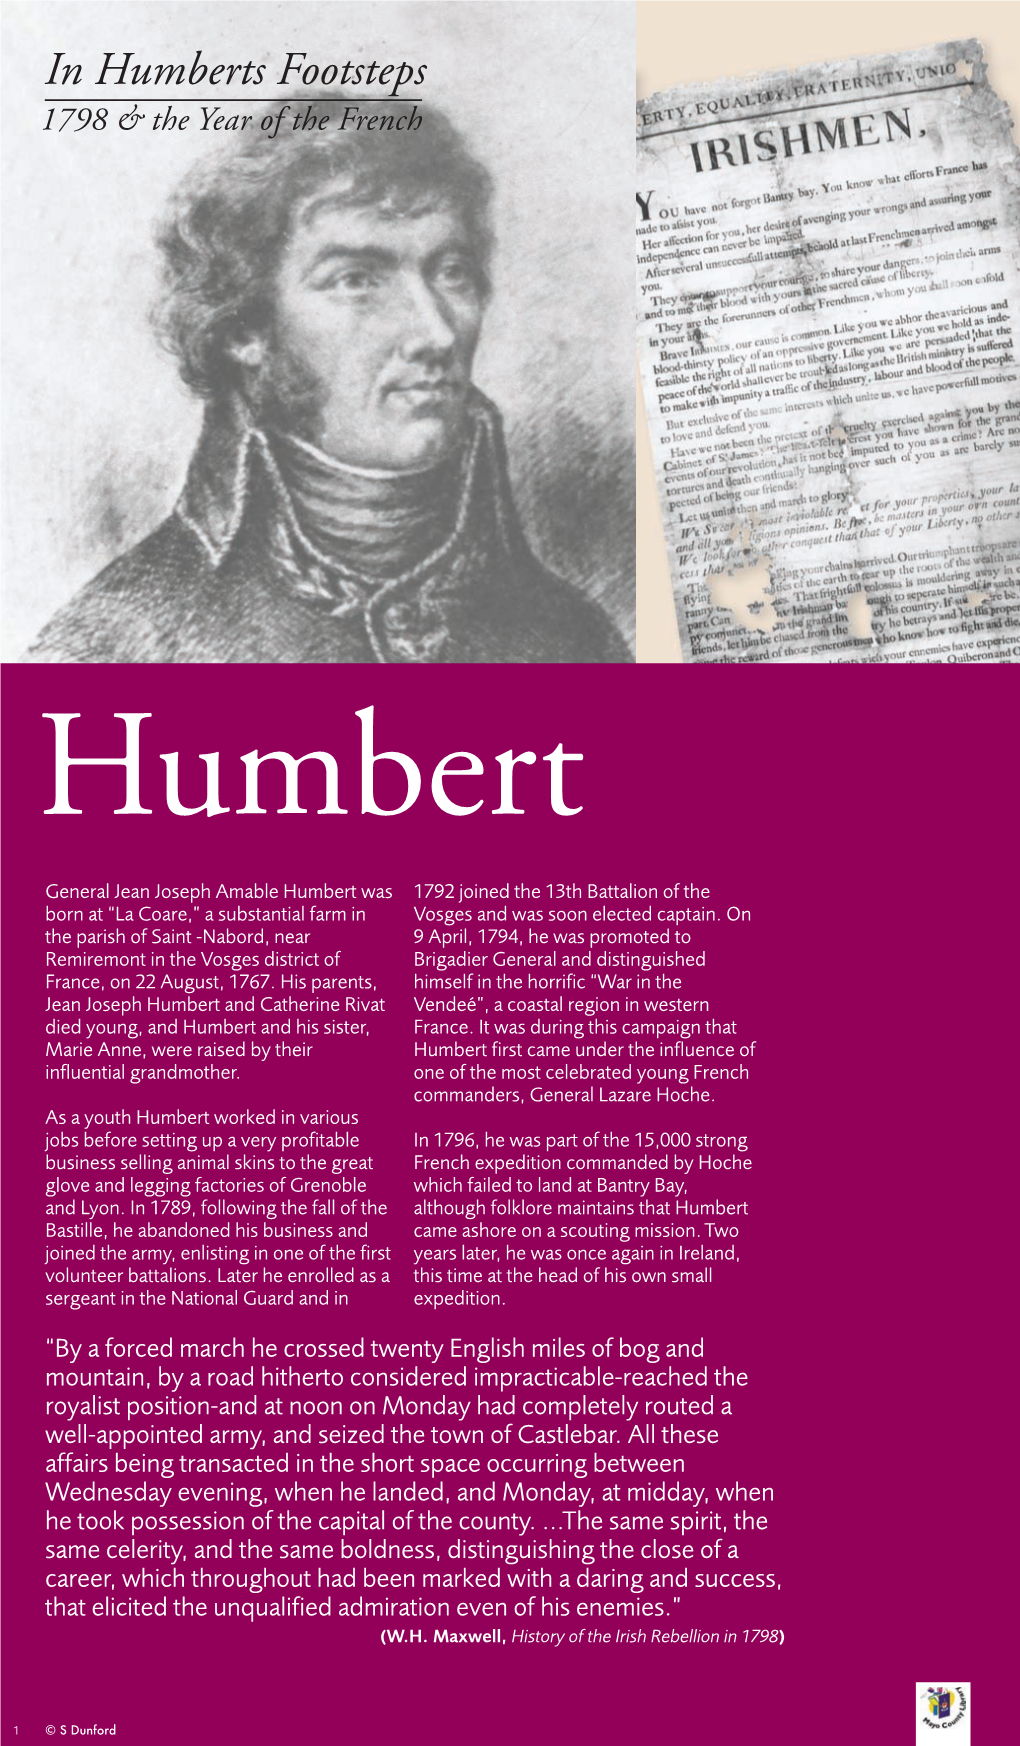 In Humberts Footsteps 1798 & the Year of the French